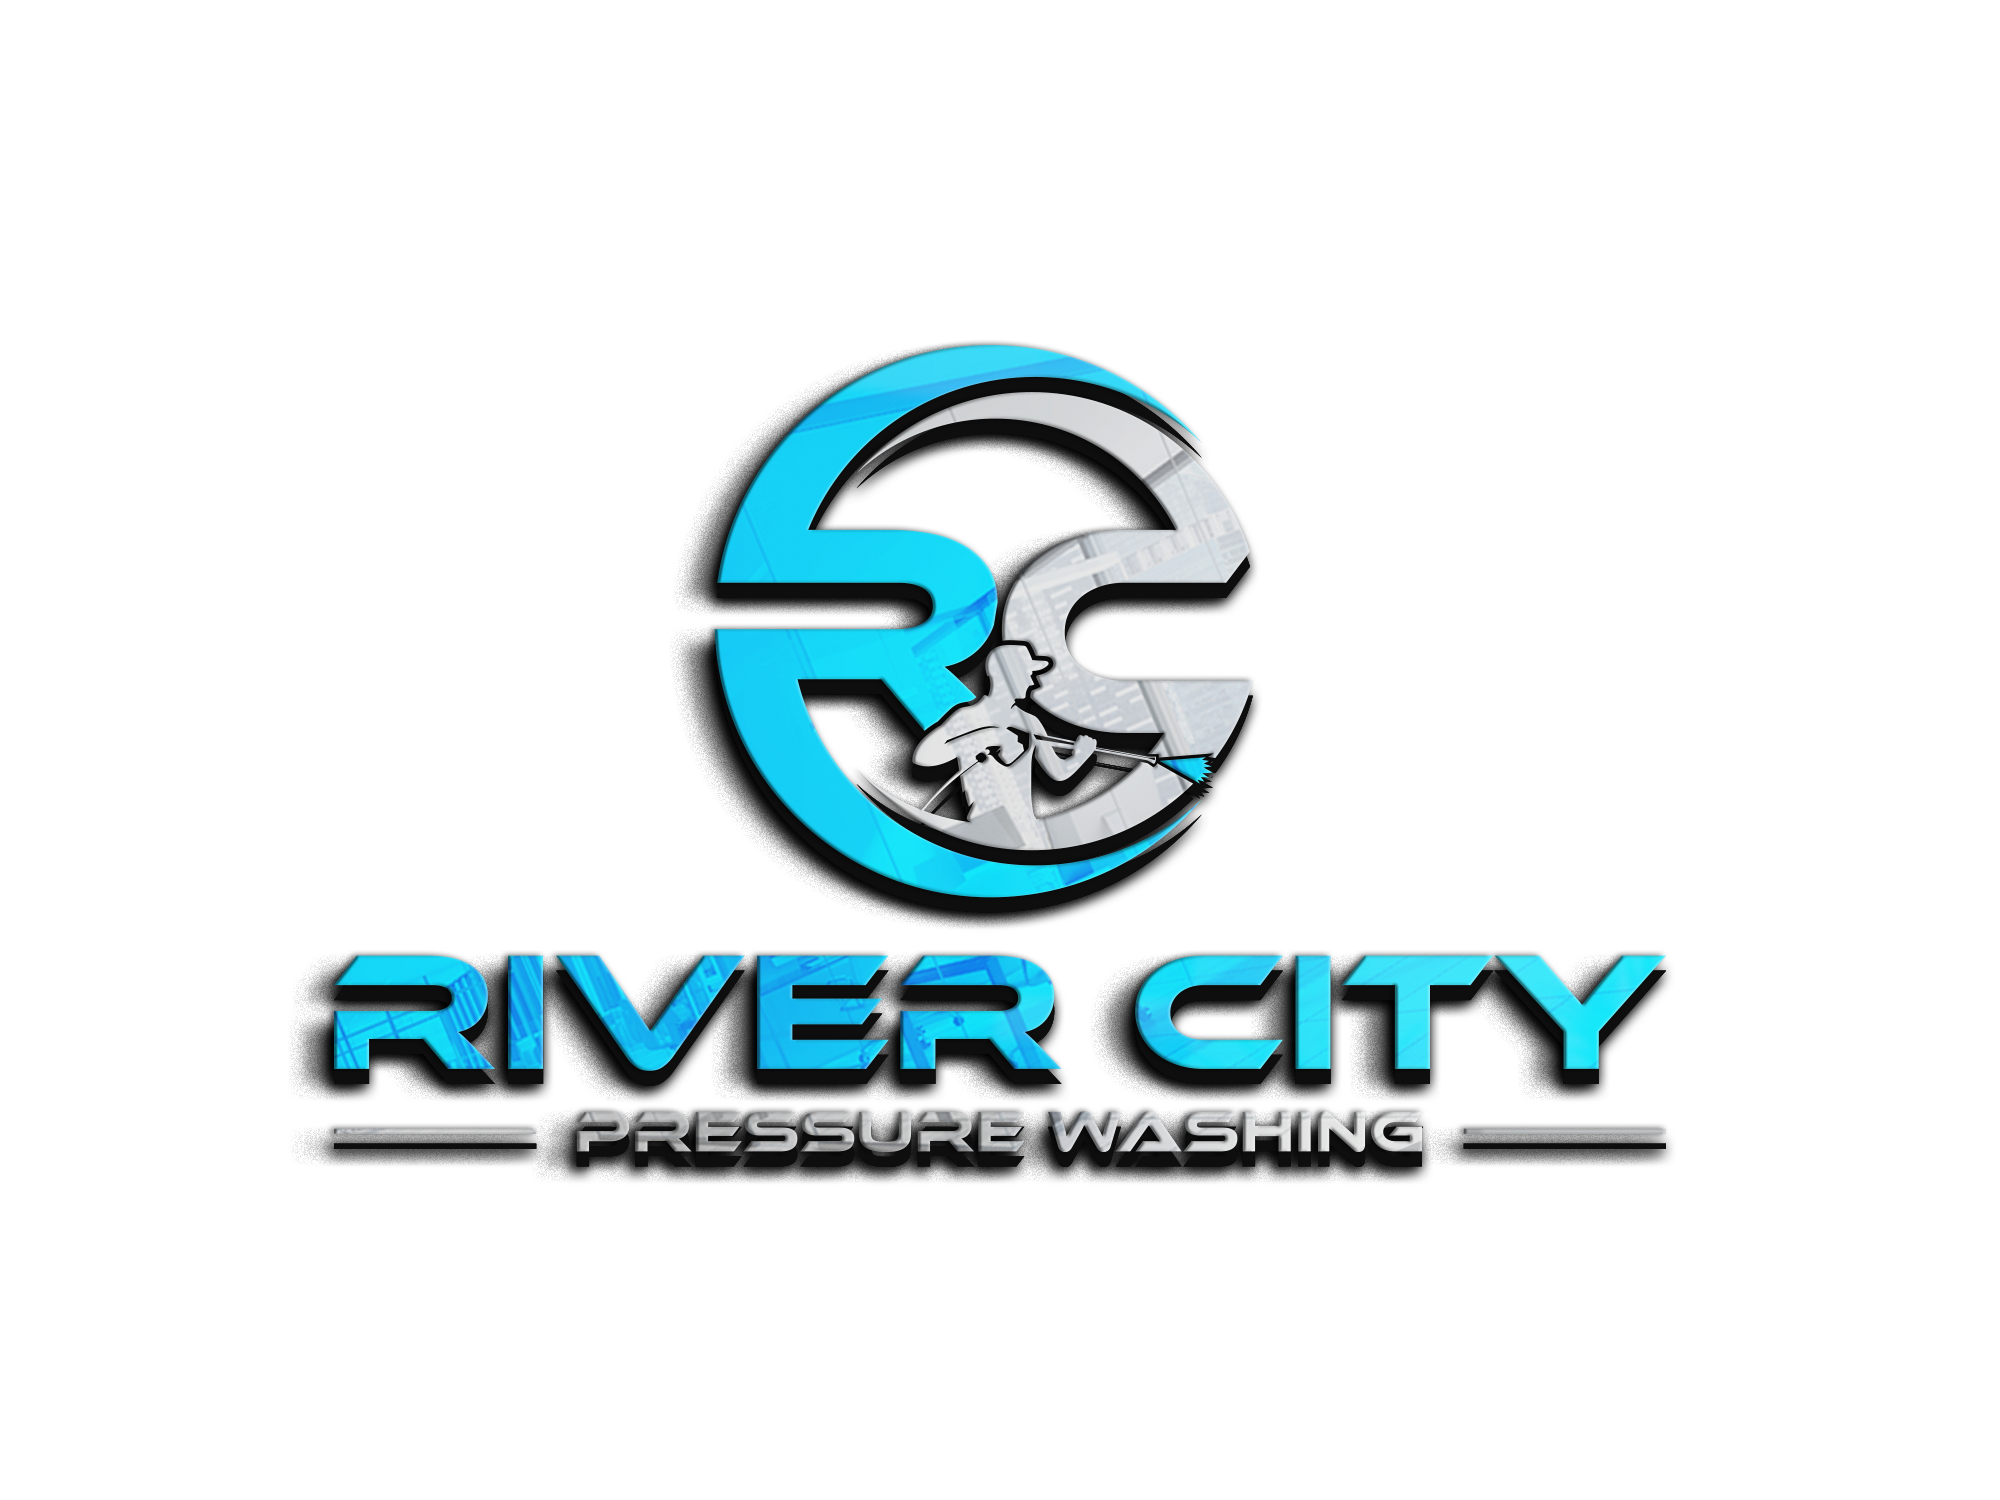 River City Pressure Washing Provides quality pressure washing for residential and commercial clients in central Illinois